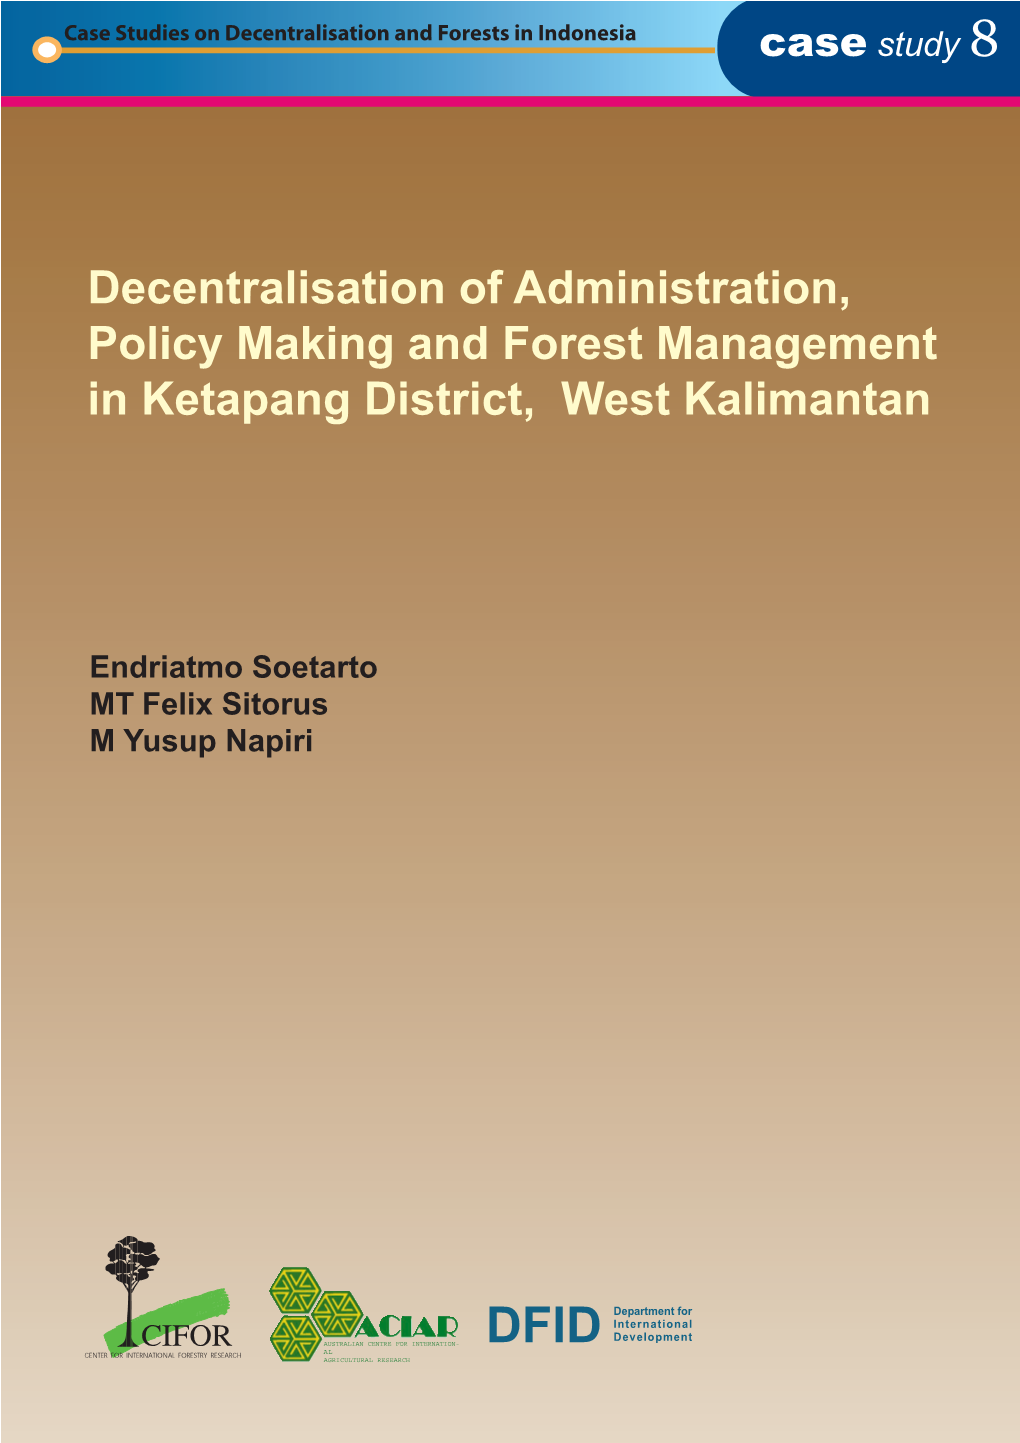 Decentralisation of Administration, Policy Making and Forest Management in Ketapang District, West Kalimantan